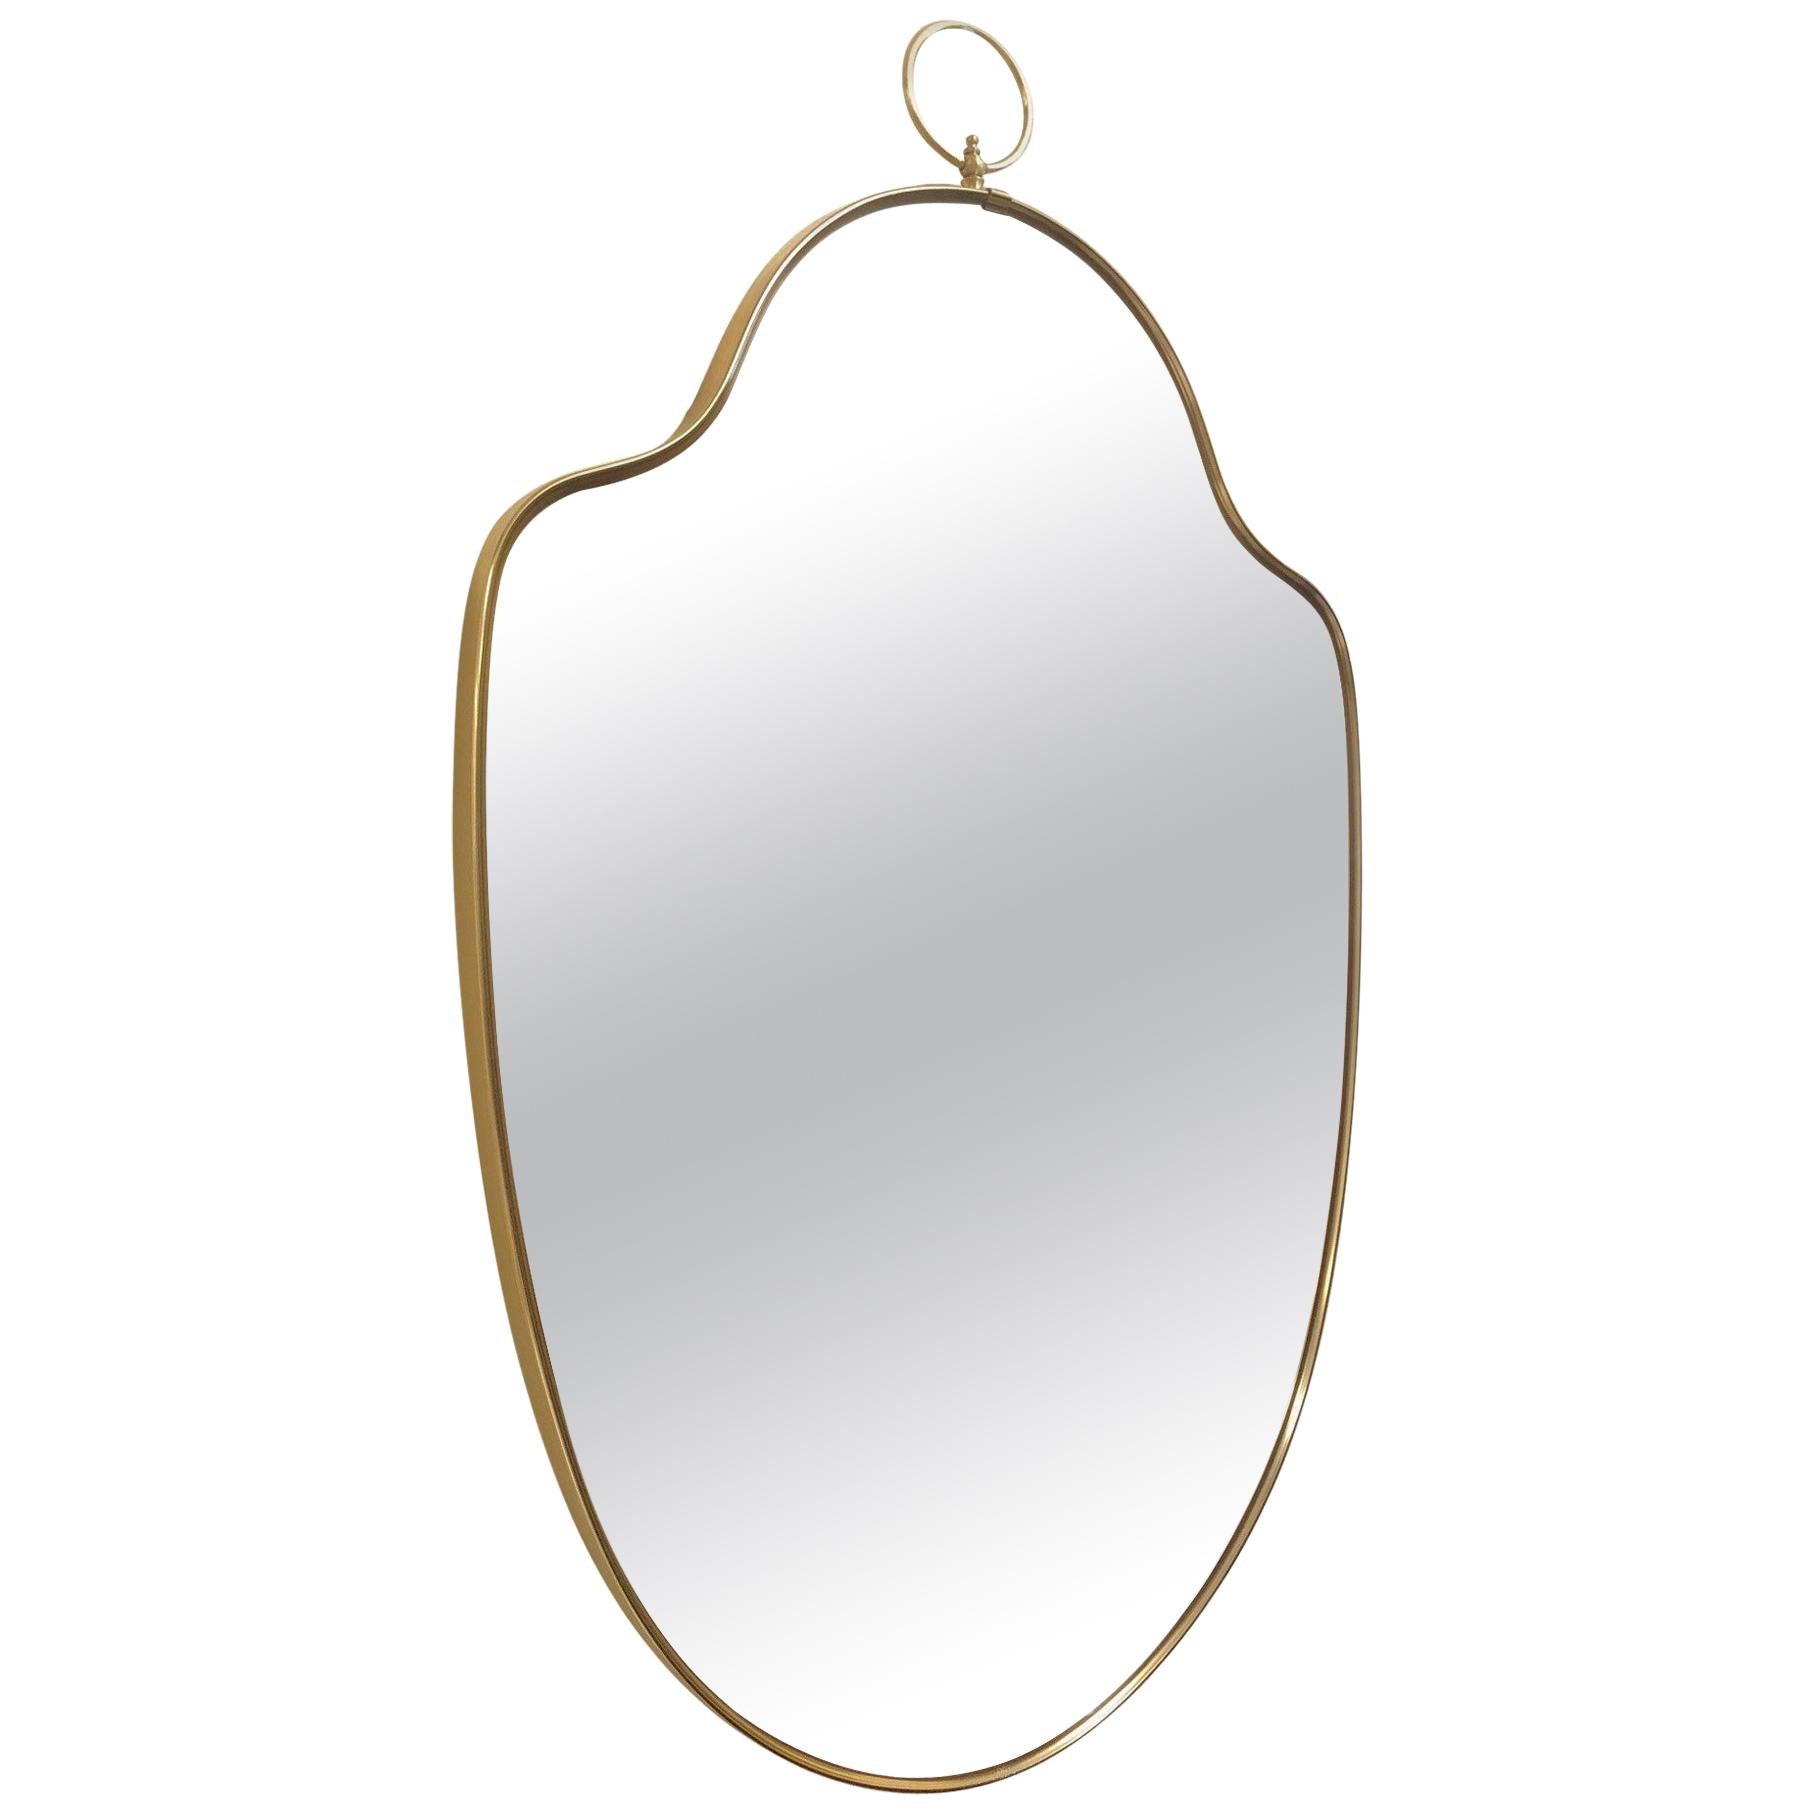 Italian brass mirror with a decorative ring at the top.
Measures: 31